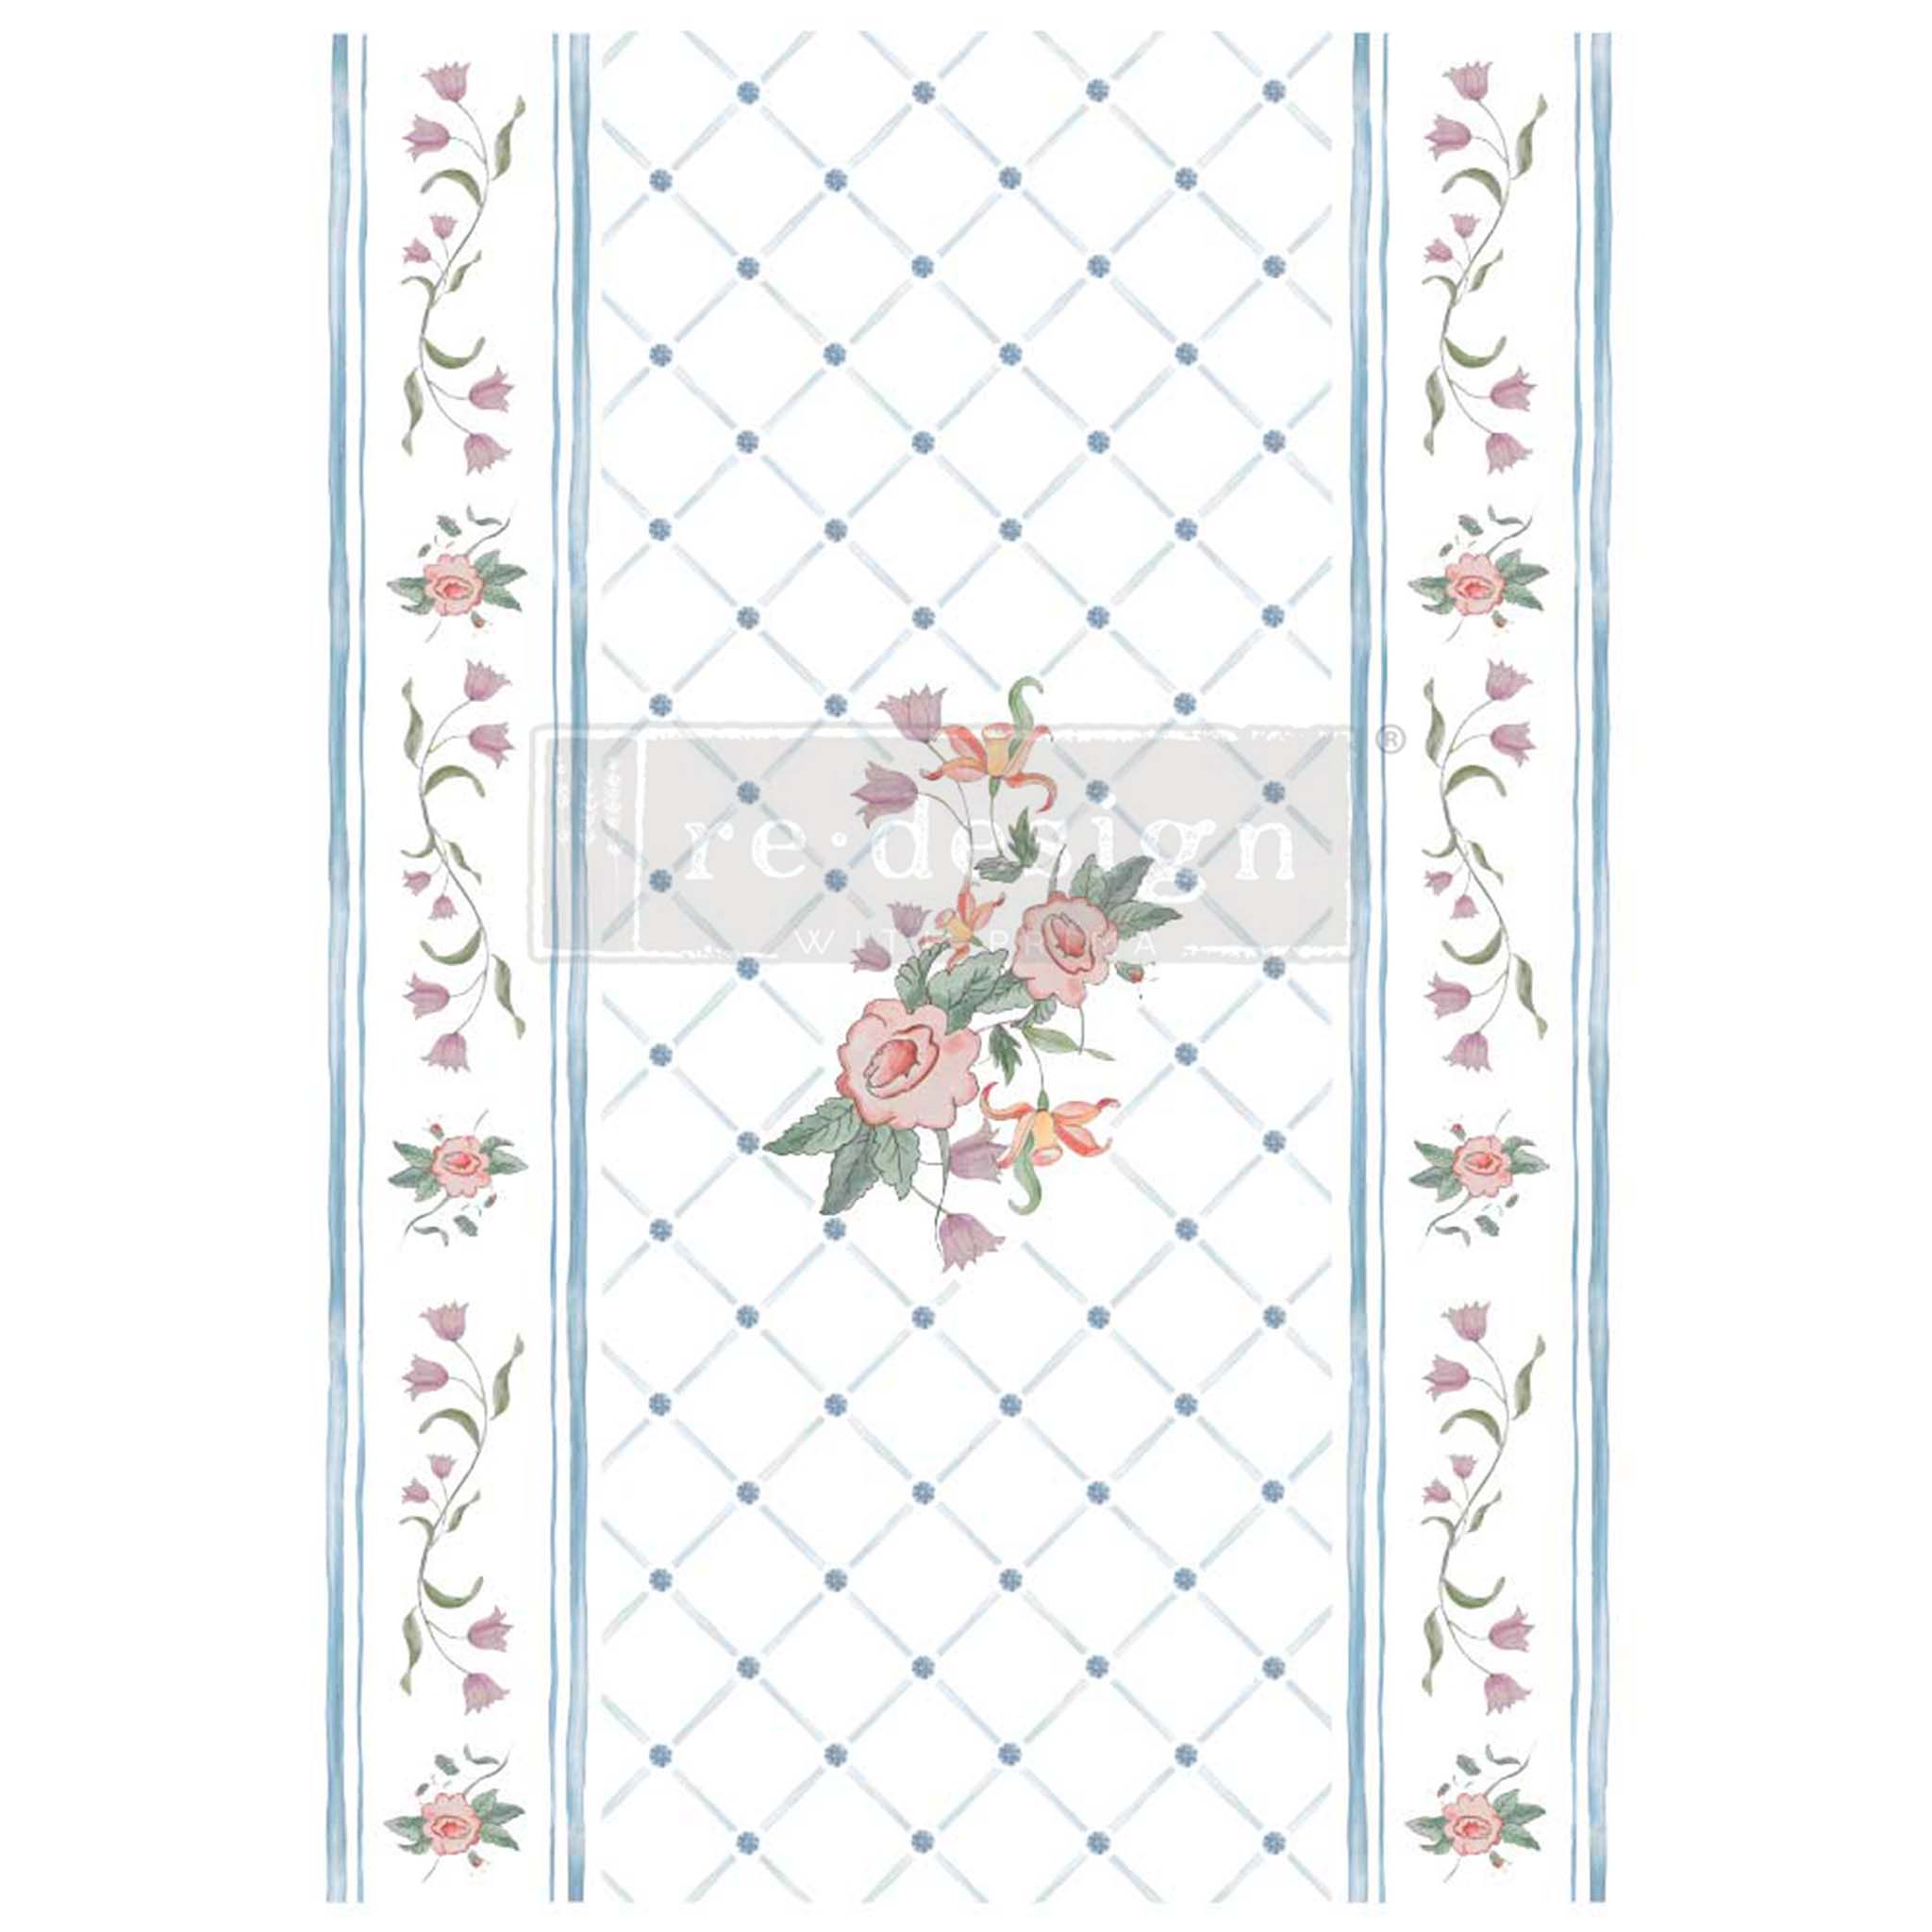 Rub-on furniture transfer that features a charming country lattice pattern with blue diamond print and beautiful roses is against a white background.